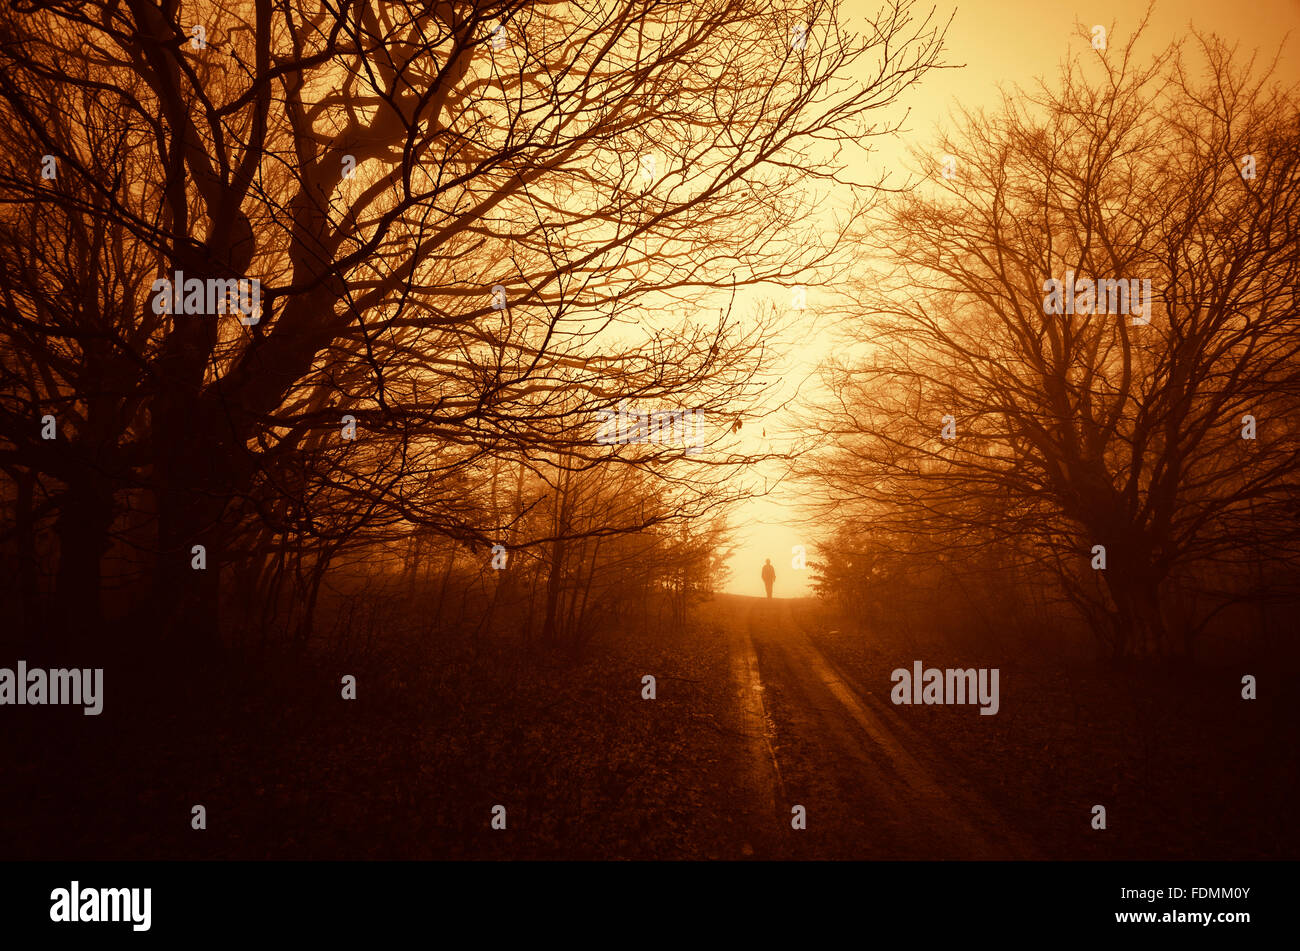 man silhouette on dark road with scary trees in sunset light Stock Photo